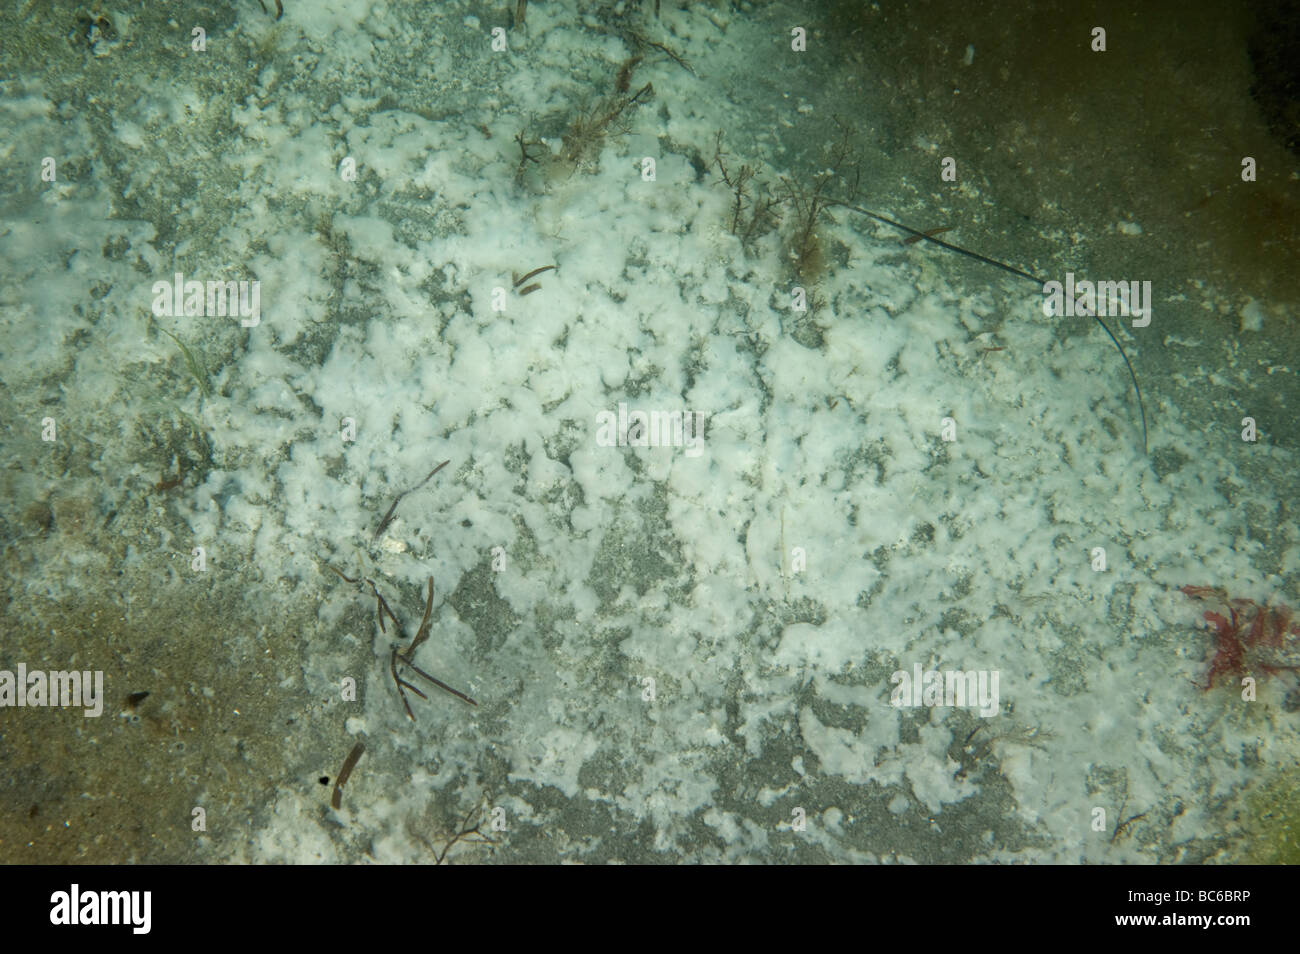 Seafloor with signs of lack of oxygen, Sweden Stock Photo